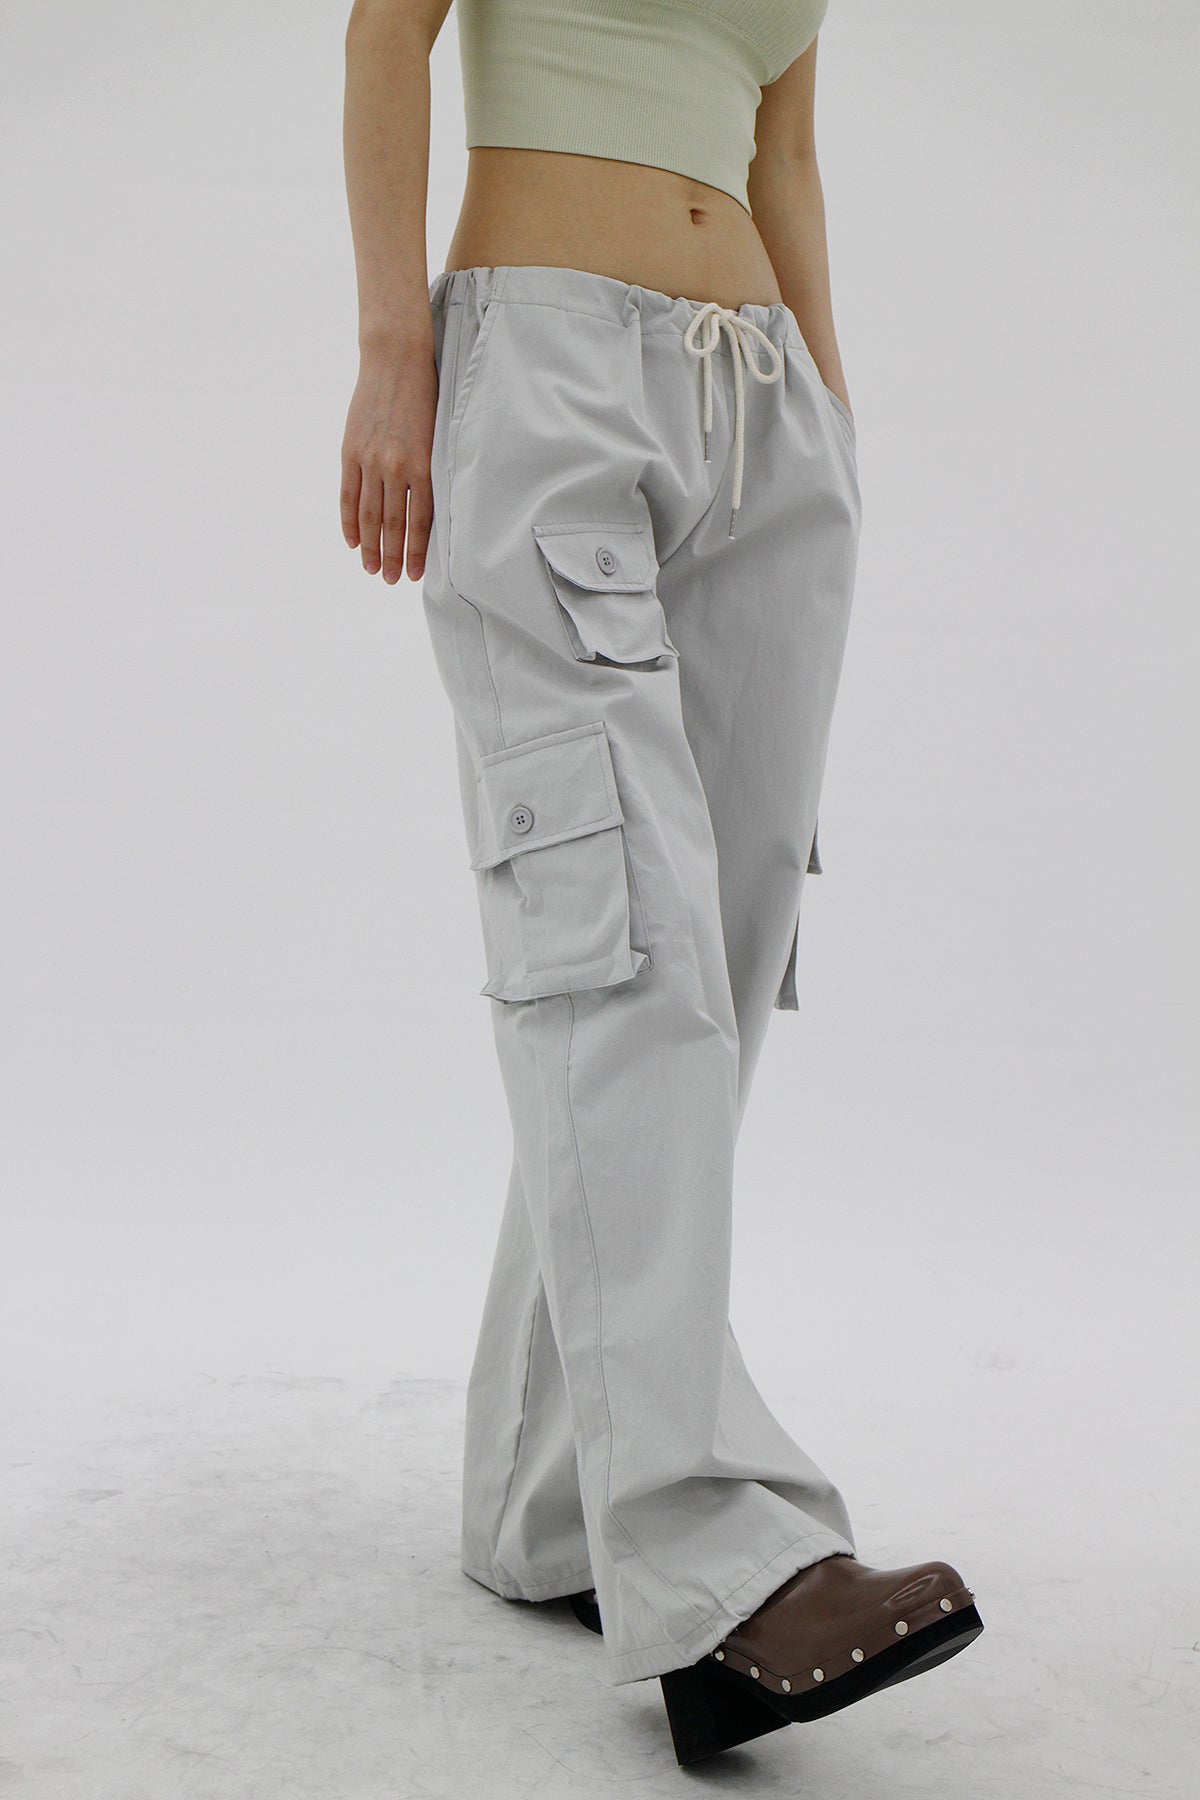 low-rise pocket-string gray trousers